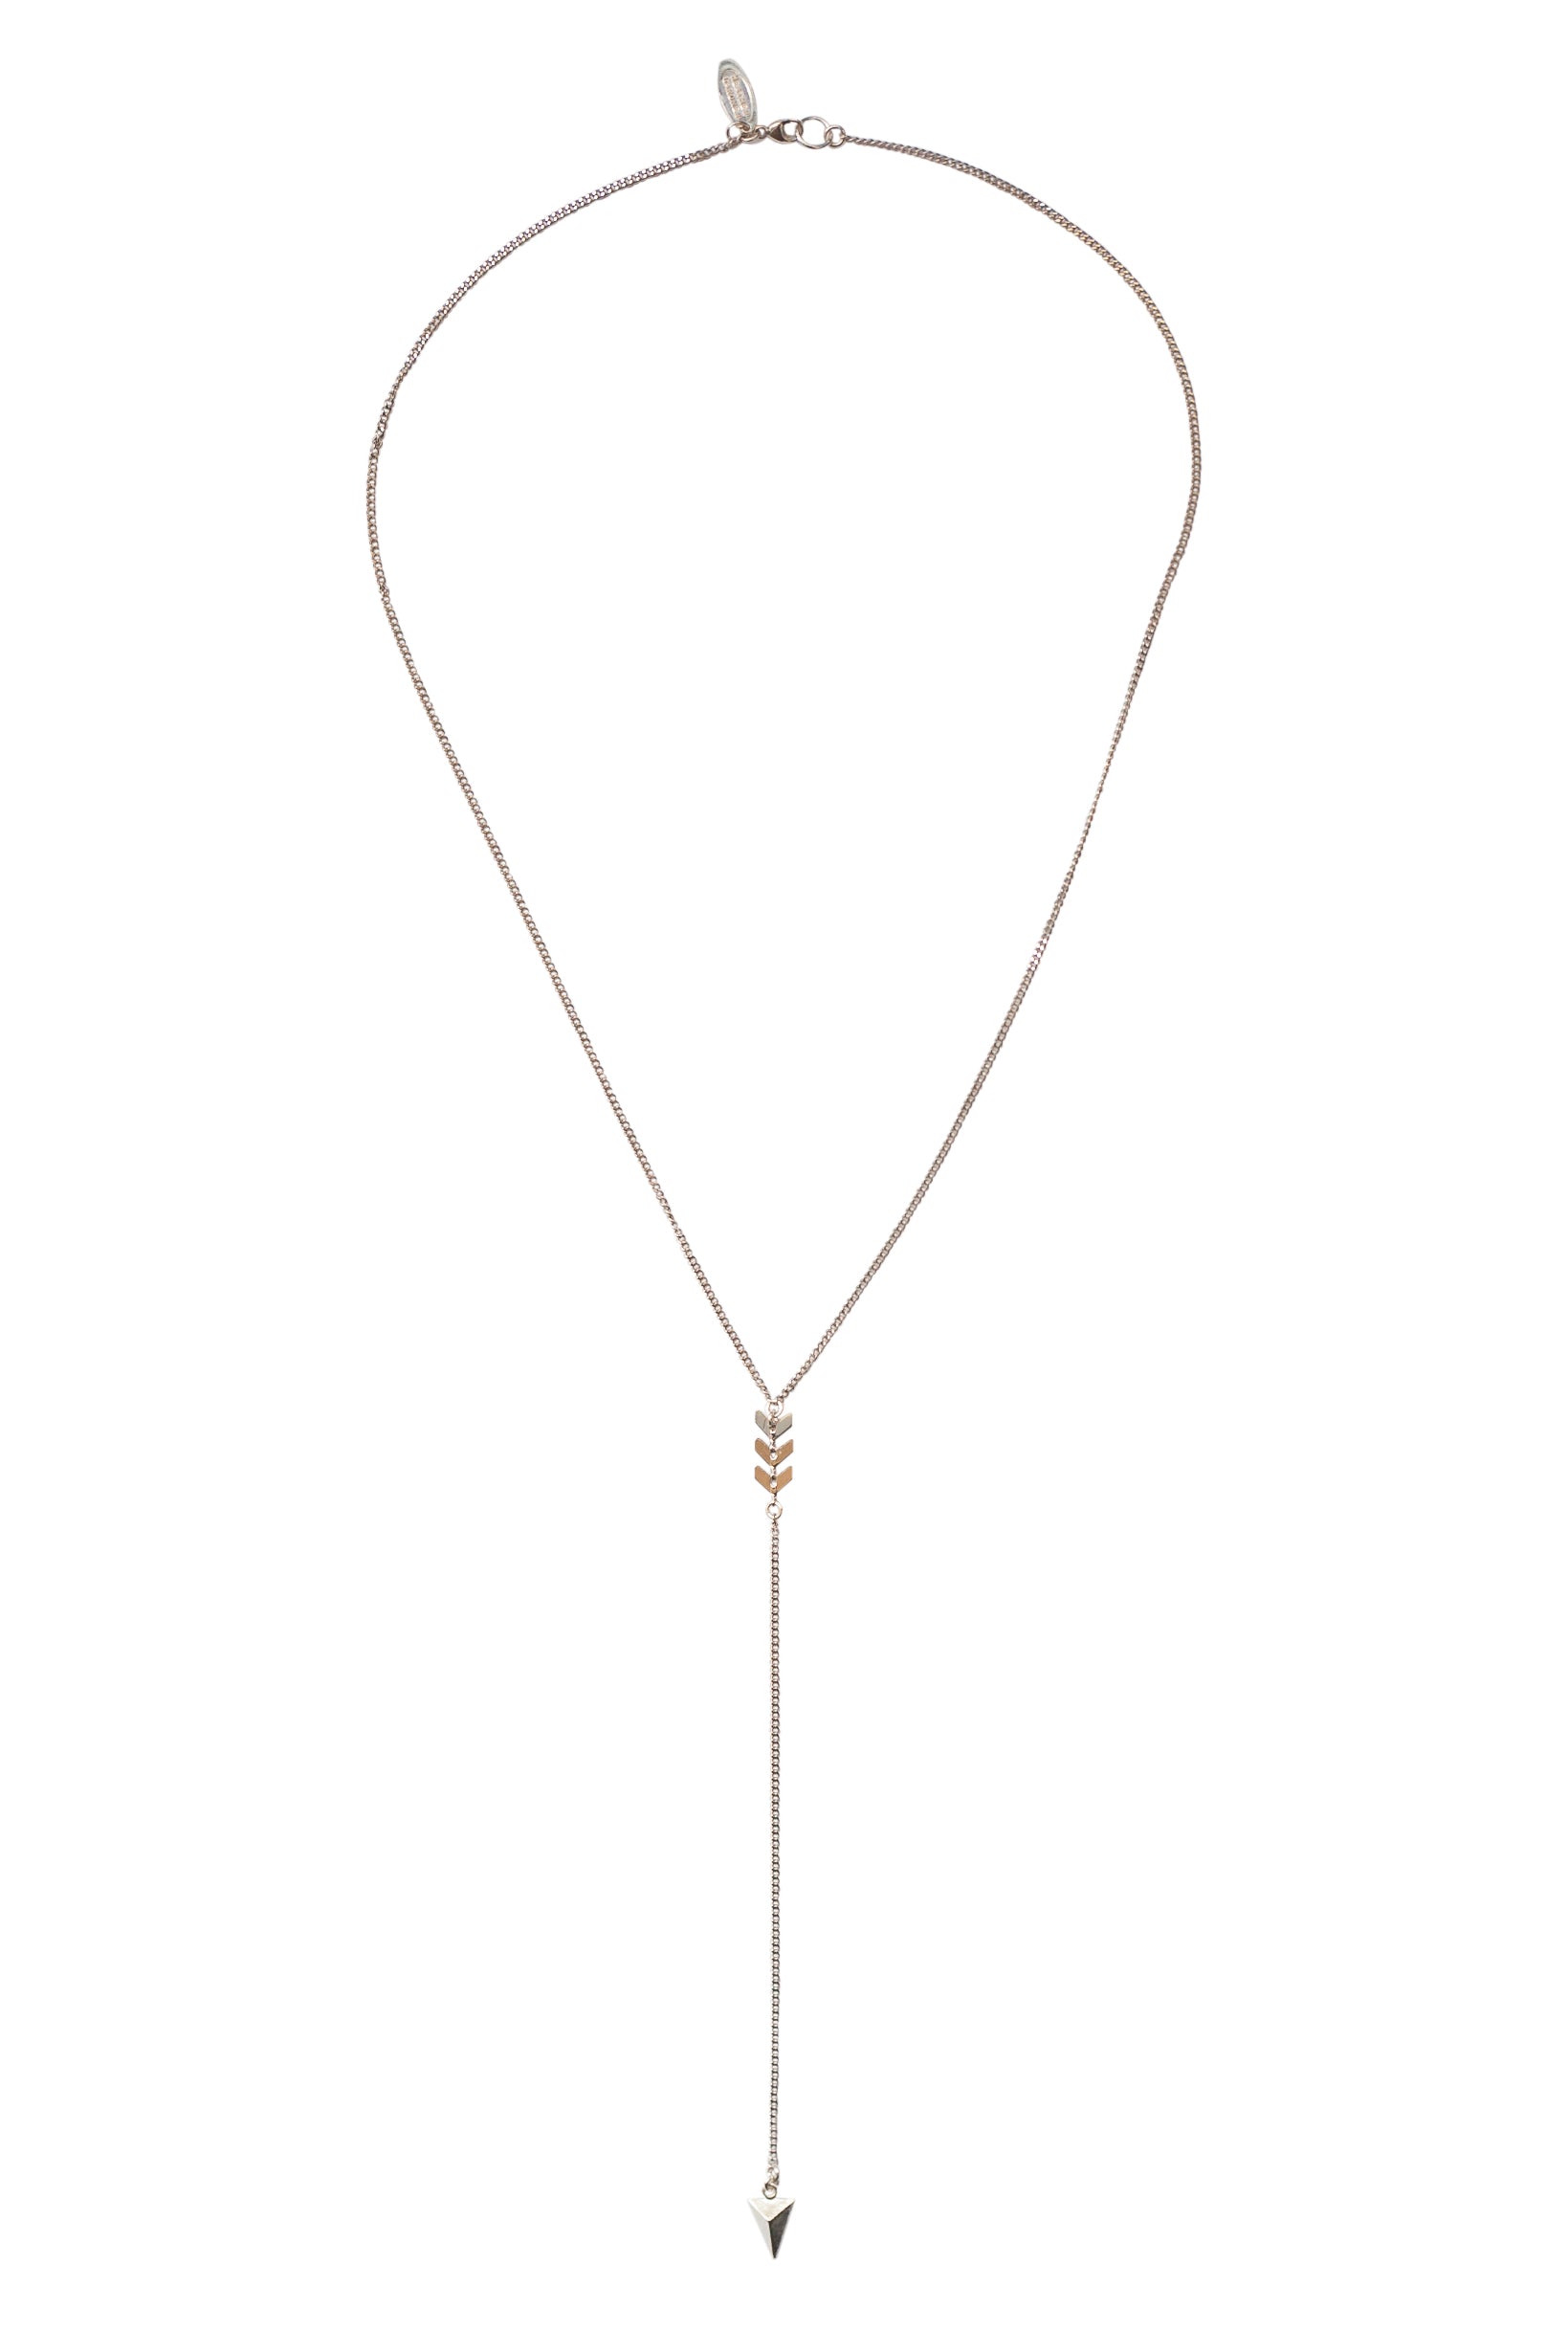 Chevron Lariat Necklace in Gold, Silver, Rose Gold, or Mixed Metal